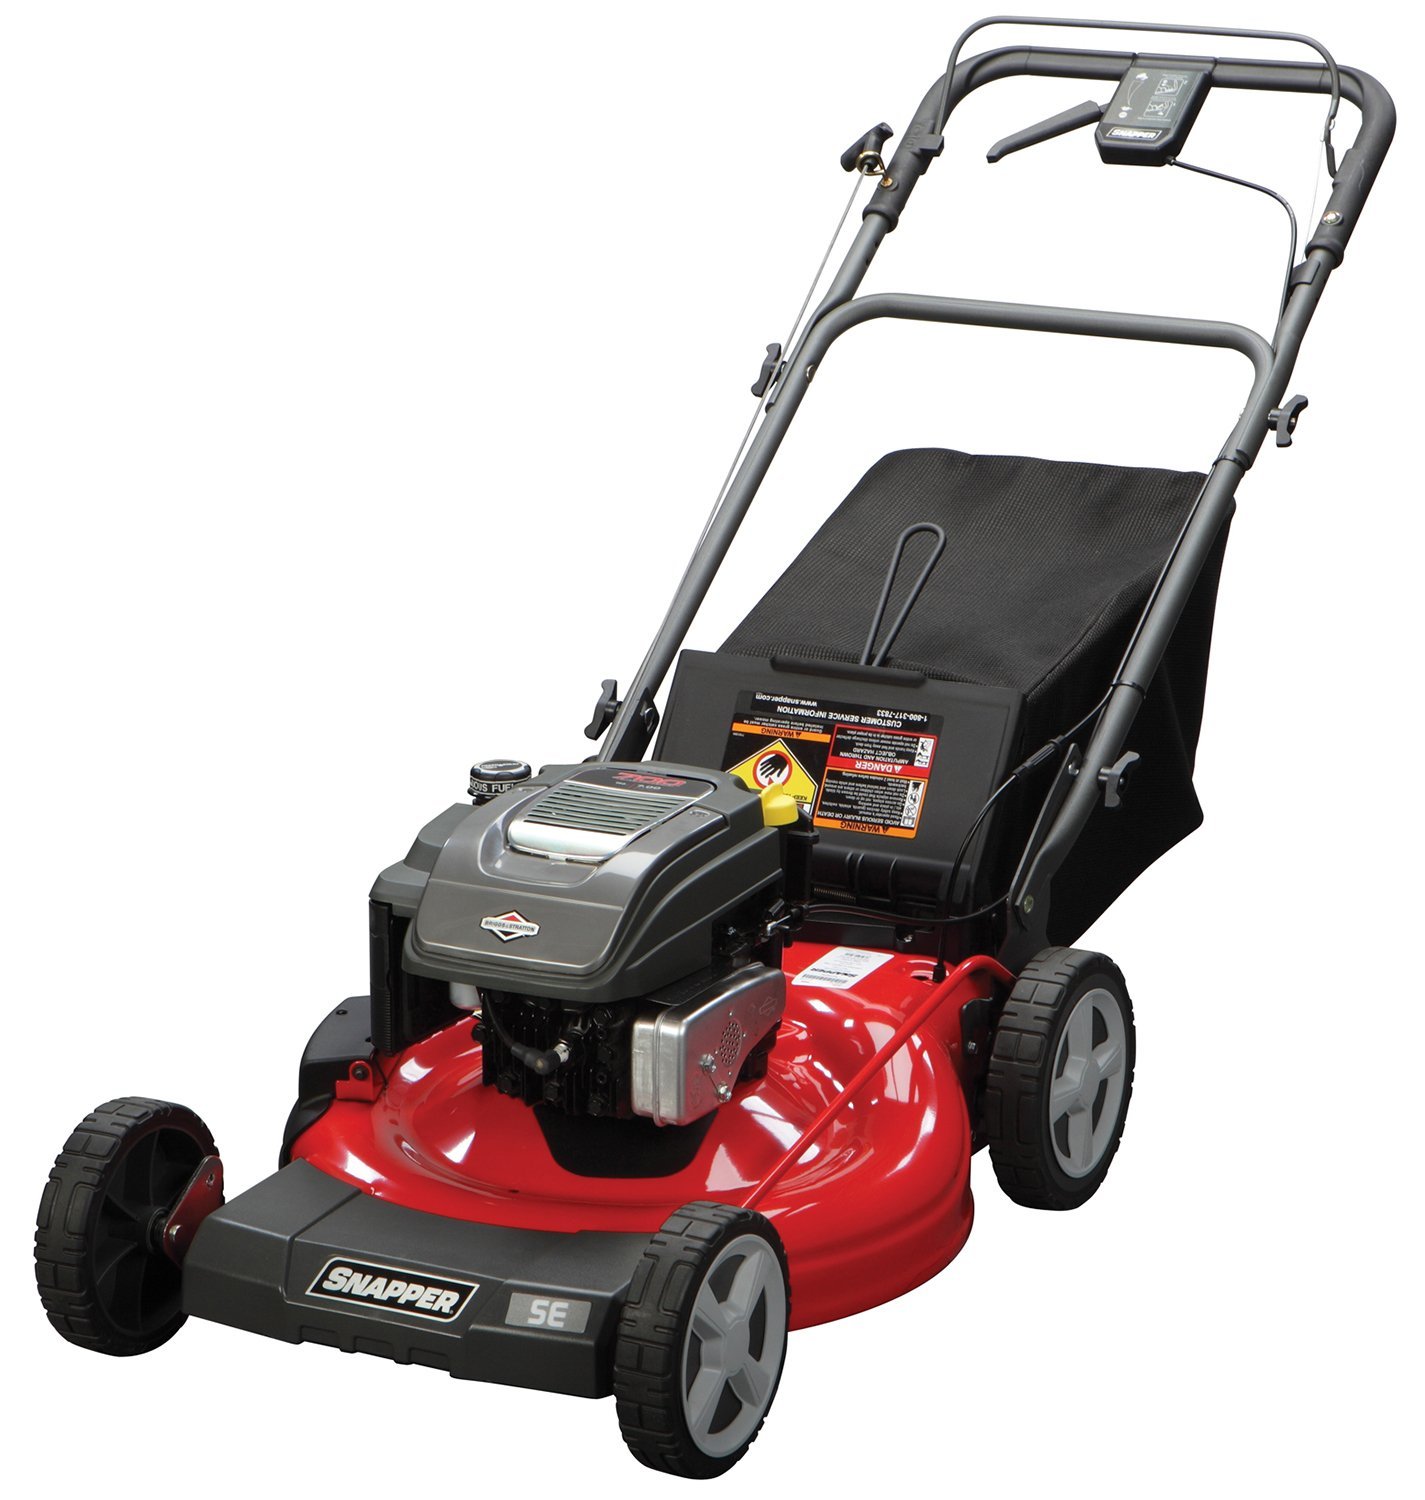 Snapper SP90 Self Propelled Lawn Mower Review - Top5LawnMowers.com